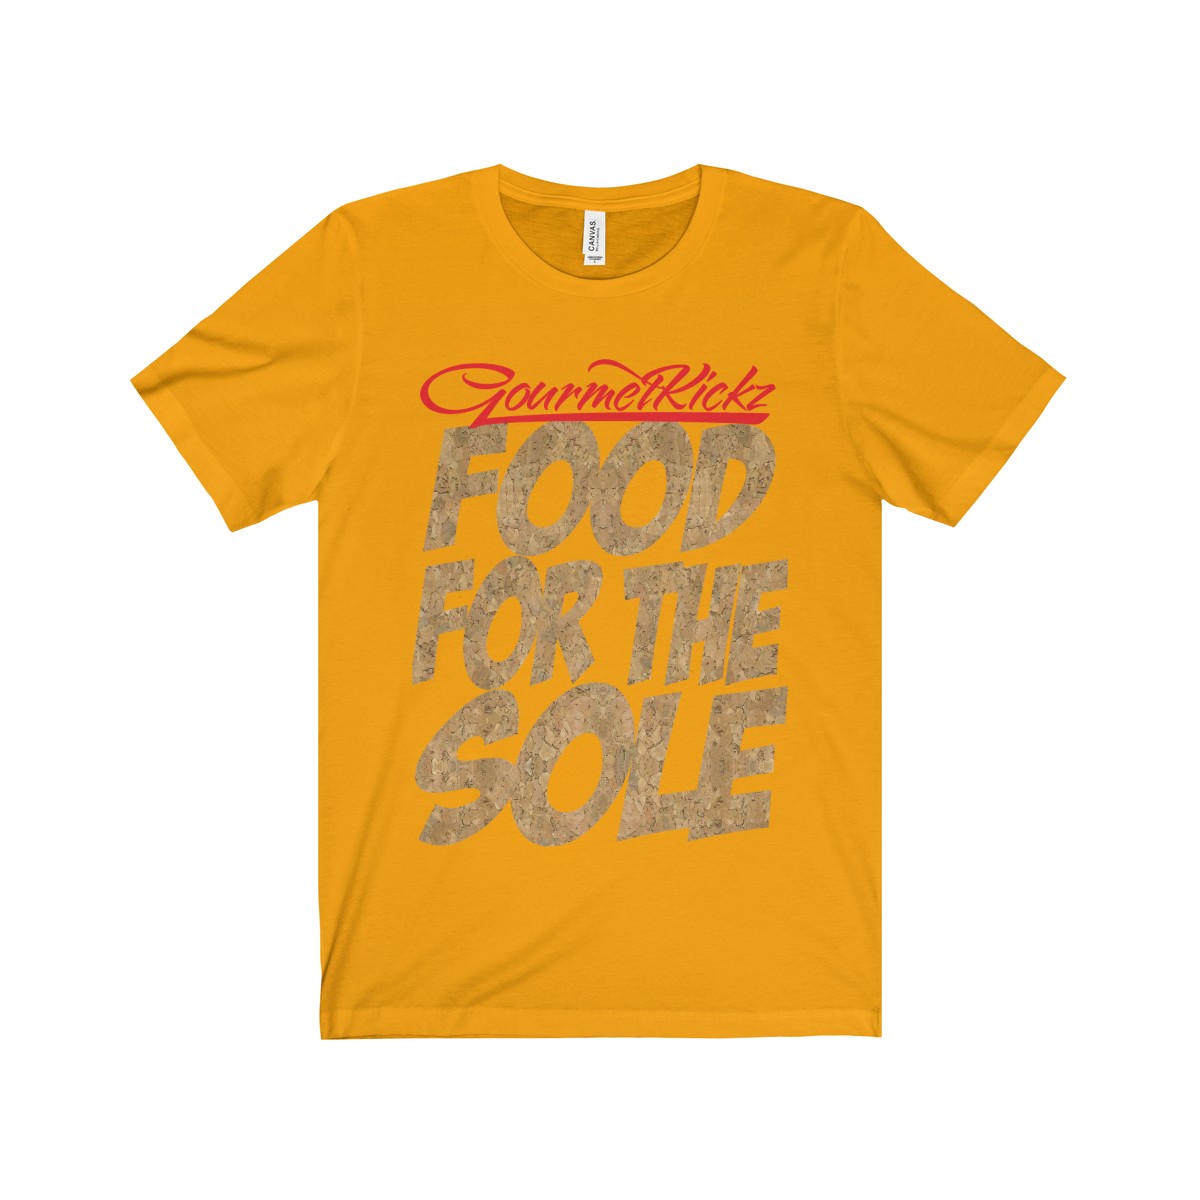 LeBron Sneaker ColorwayMatch T-Shirt | Cork Food for the Sole